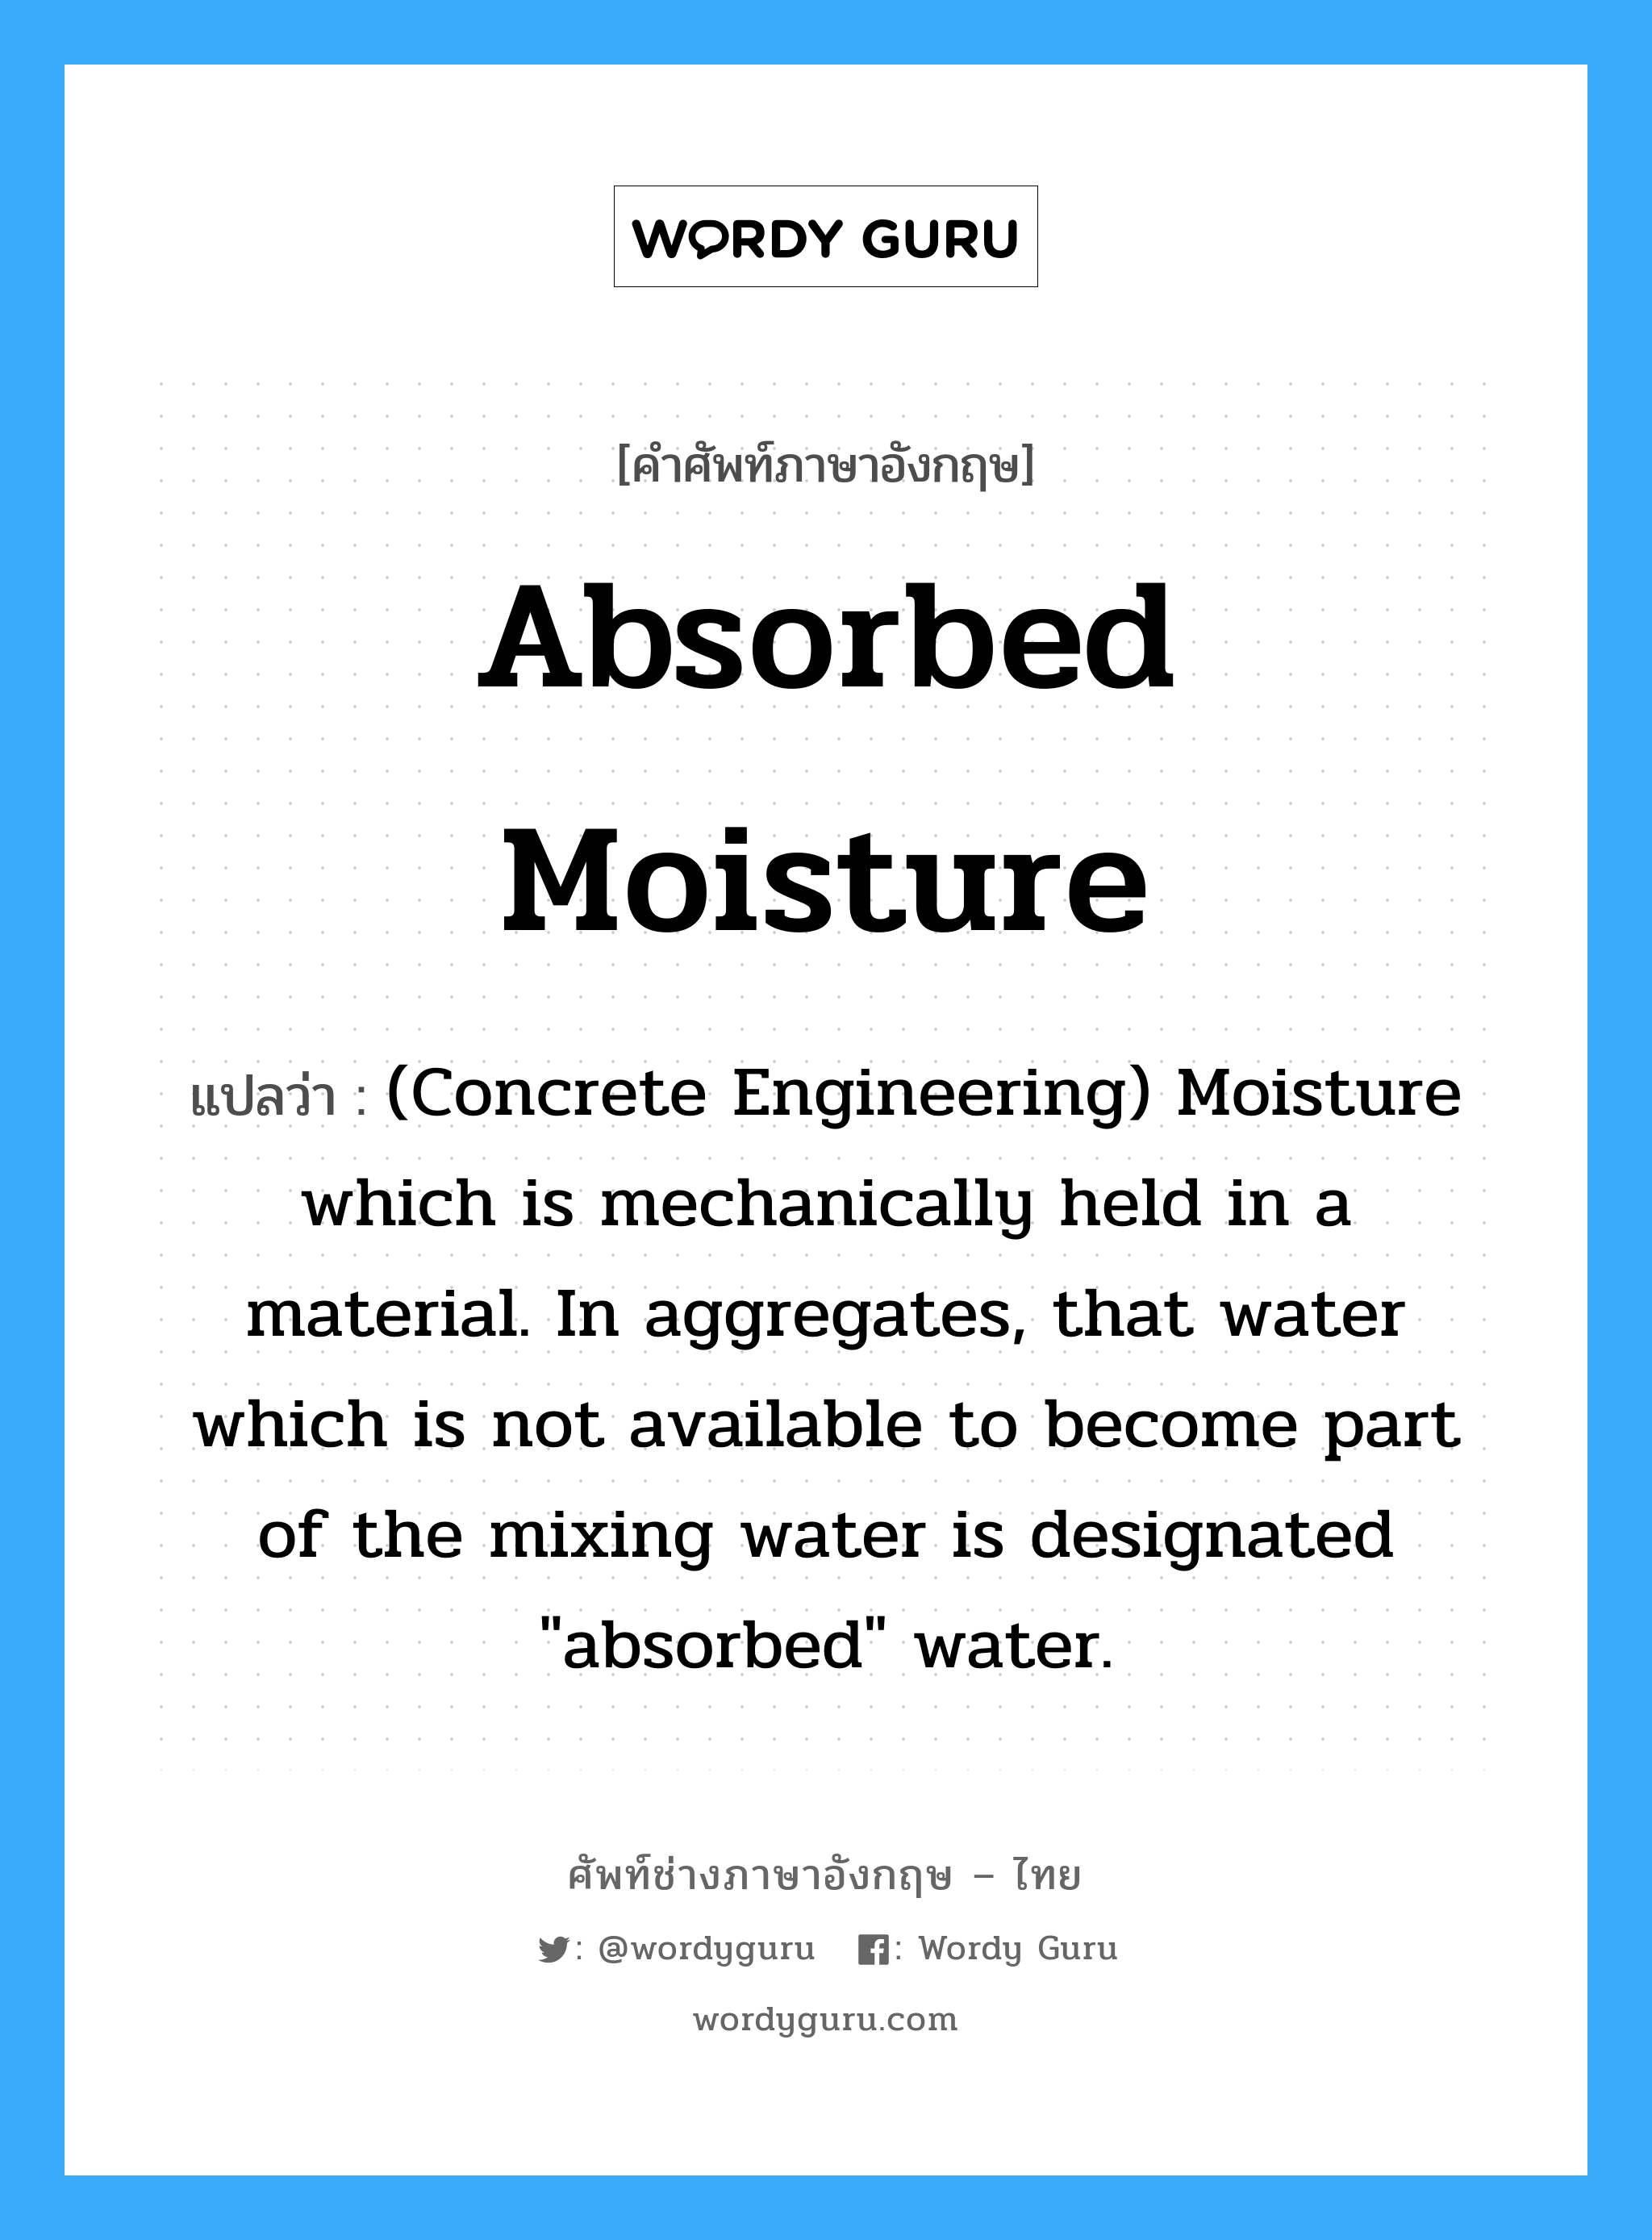 (Concrete Engineering) Moisture which is mechanically held in a material. In aggregates, that water which is not available to become part of the mixing water is designated "absorbed" water. ภาษาอังกฤษ?, คำศัพท์ช่างภาษาอังกฤษ - ไทย (Concrete Engineering) Moisture which is mechanically held in a material. In aggregates, that water which is not available to become part of the mixing water is designated "absorbed" water. คำศัพท์ภาษาอังกฤษ (Concrete Engineering) Moisture which is mechanically held in a material. In aggregates, that water which is not available to become part of the mixing water is designated "absorbed" water. แปลว่า Absorbed Moisture